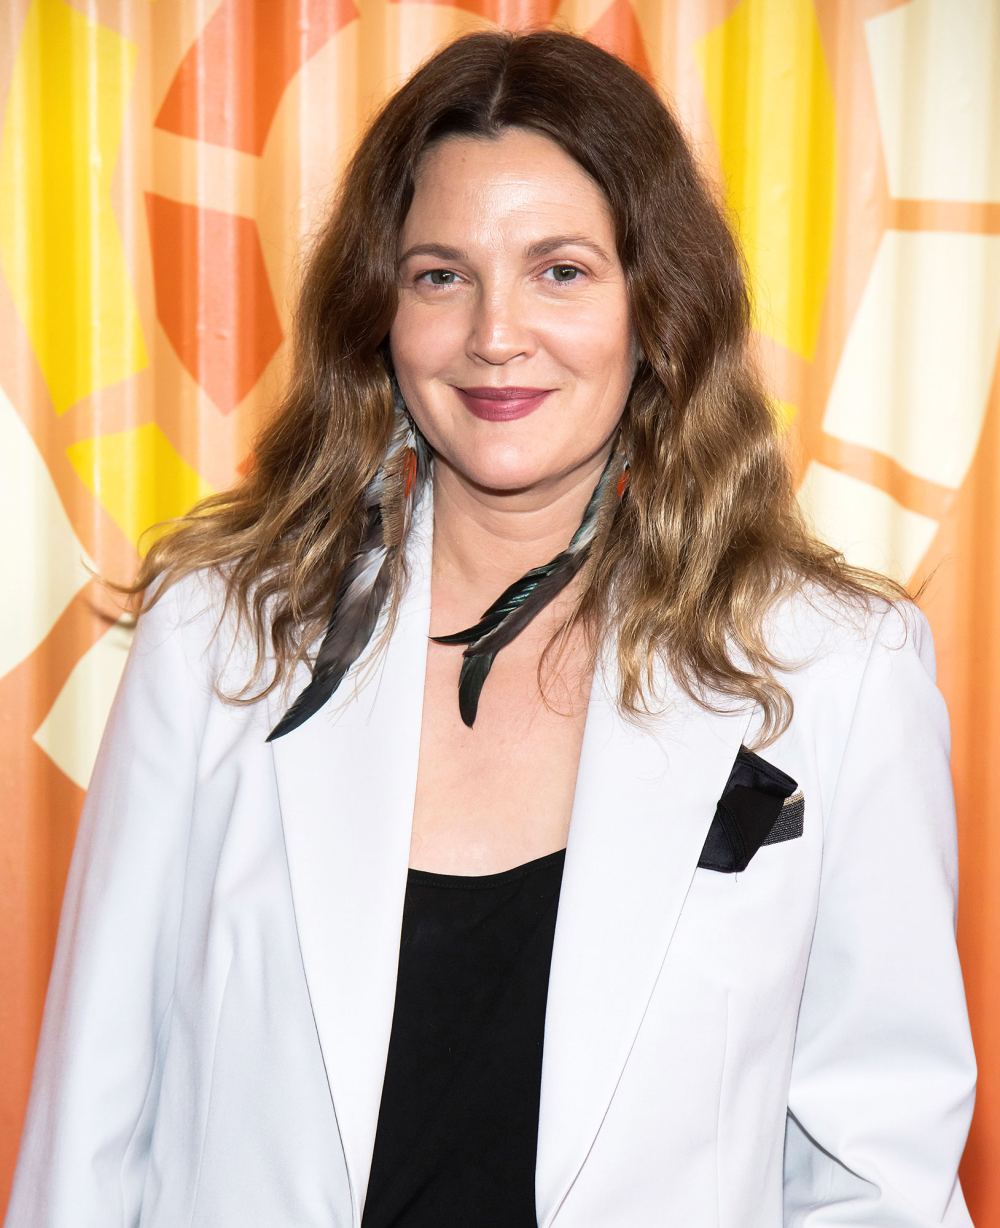 Drew Barrymore Reveals Her Daughter Olive ShotsHer Moms The Sunday Times Style Magazine Cover